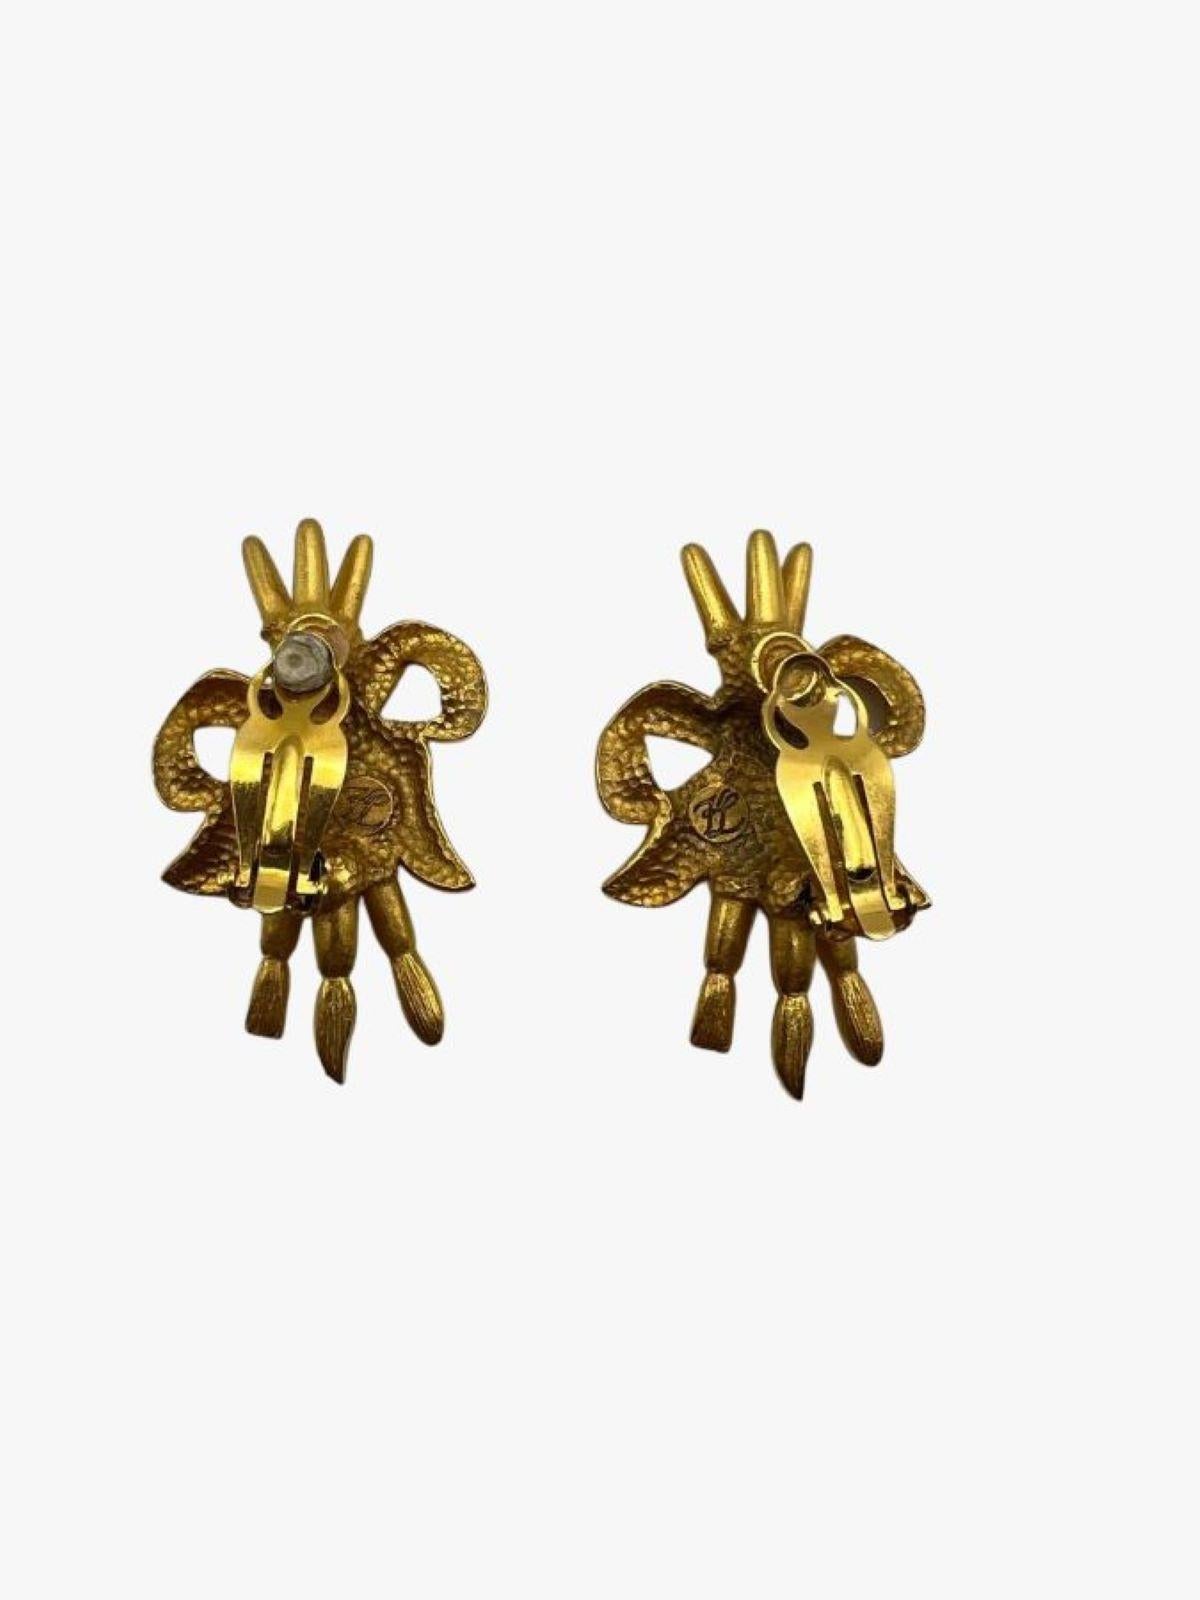 Vintage minimalist Karl Lagerfeld 24k gold plated clip on earrings featuring artist brushes. Embellished with rhinestones. 

Signed.

Period: 1980s

Condition: excellent. No visible signs of wear. 

Size: length: 5 cm, width: 3